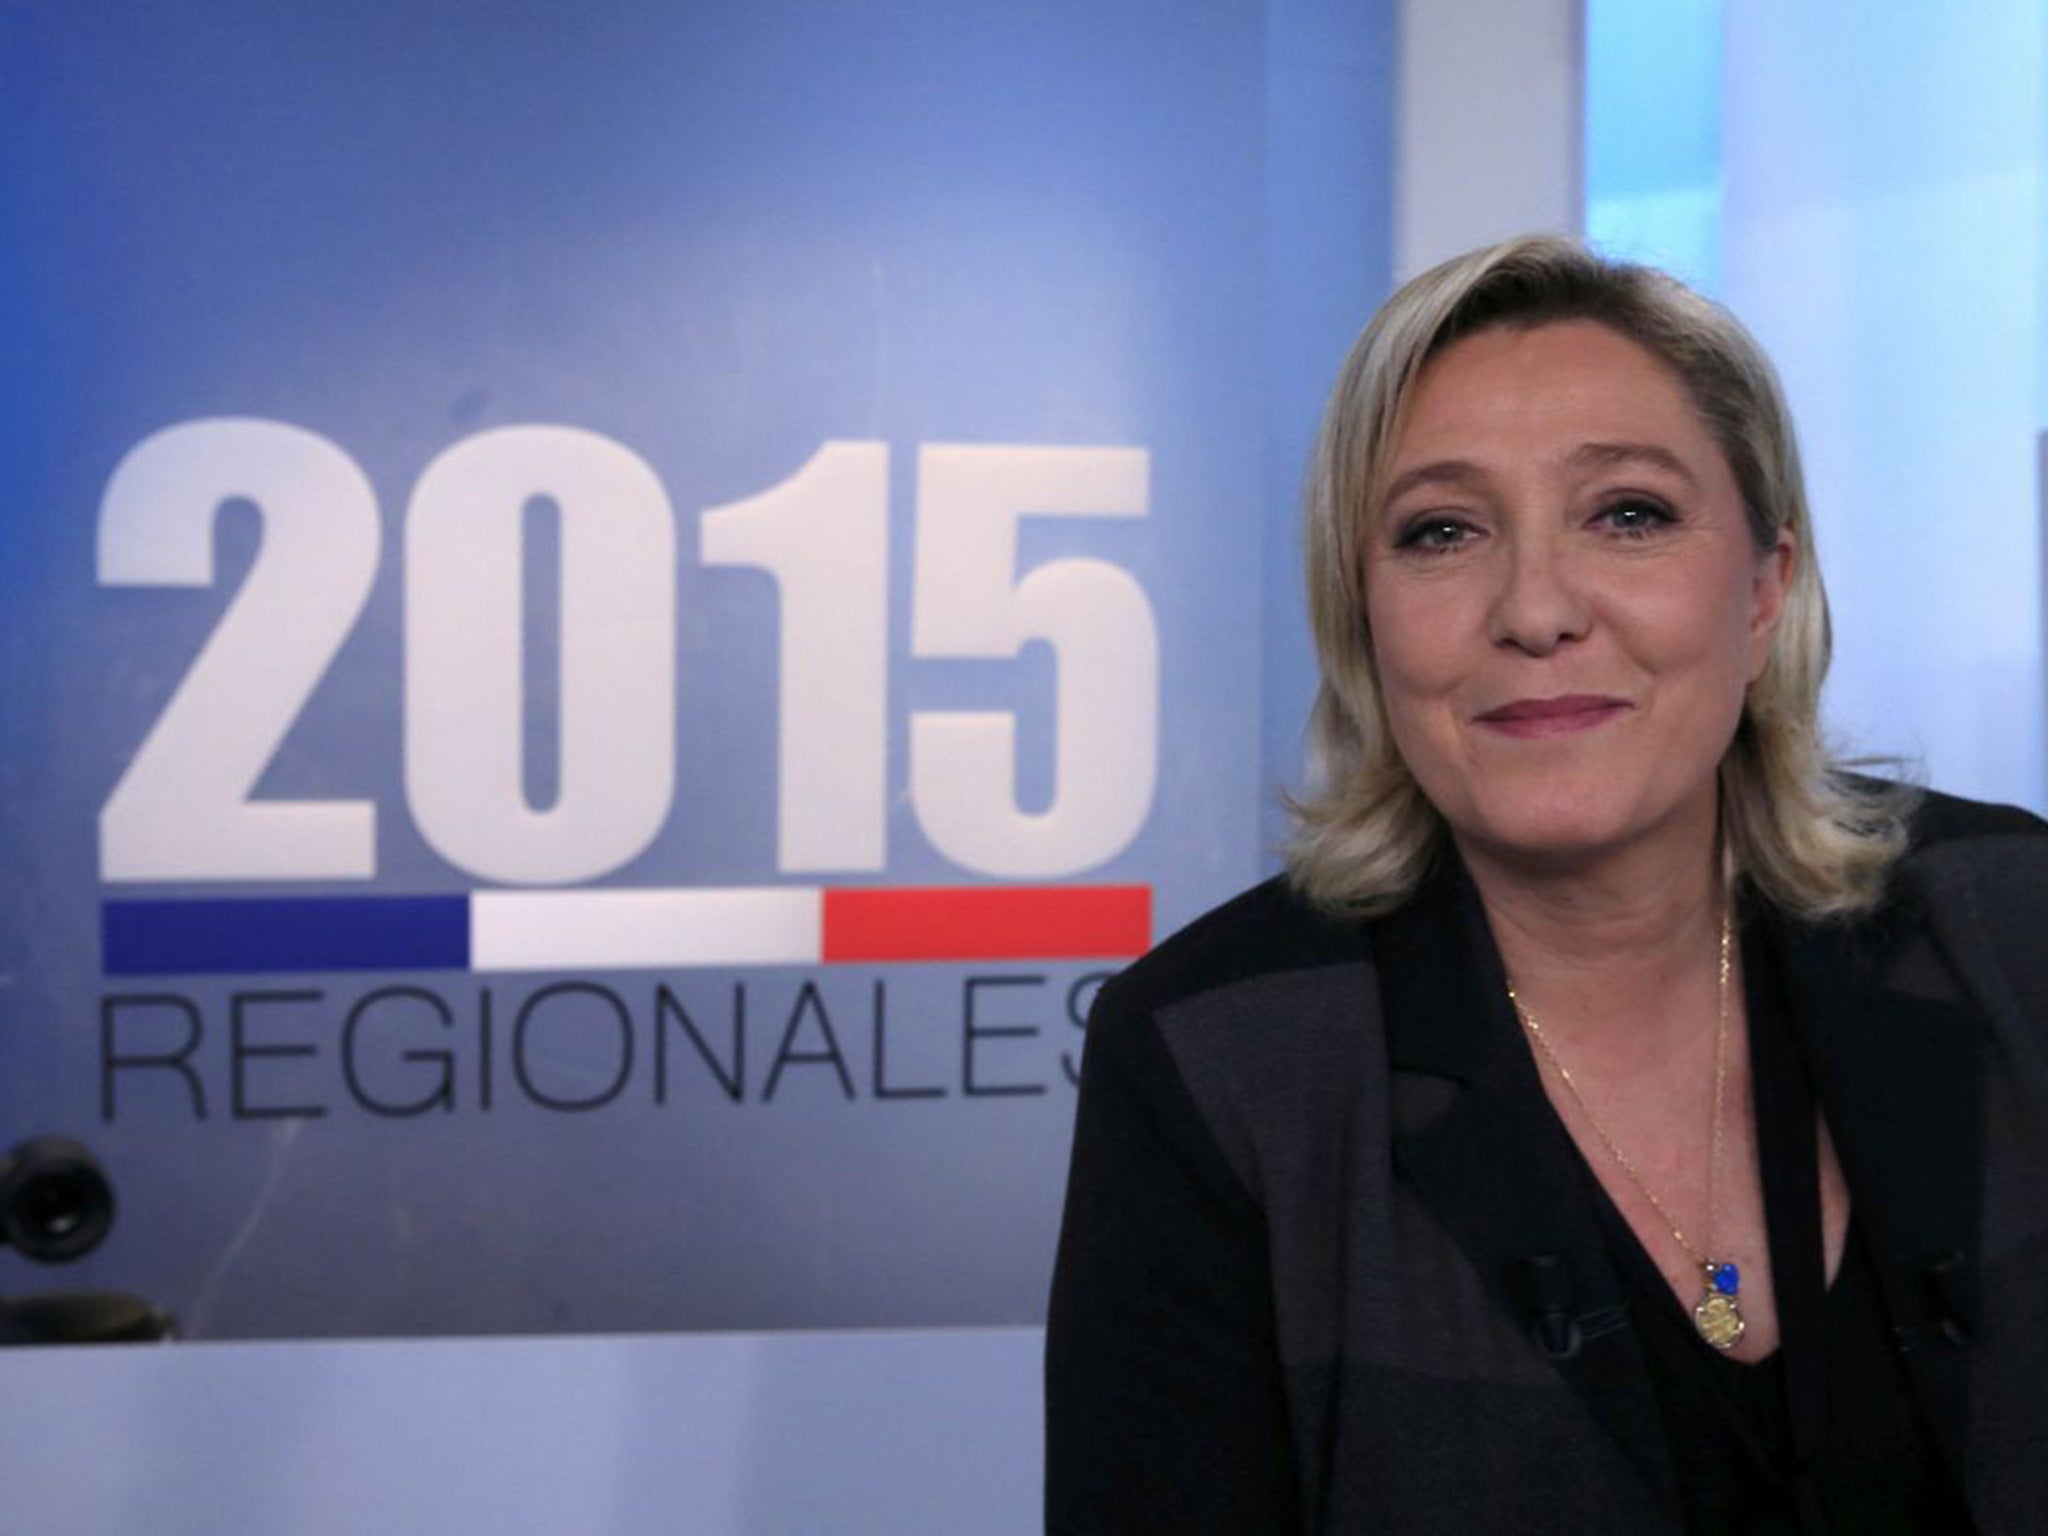 Marine Le Pen, leader of the Front National